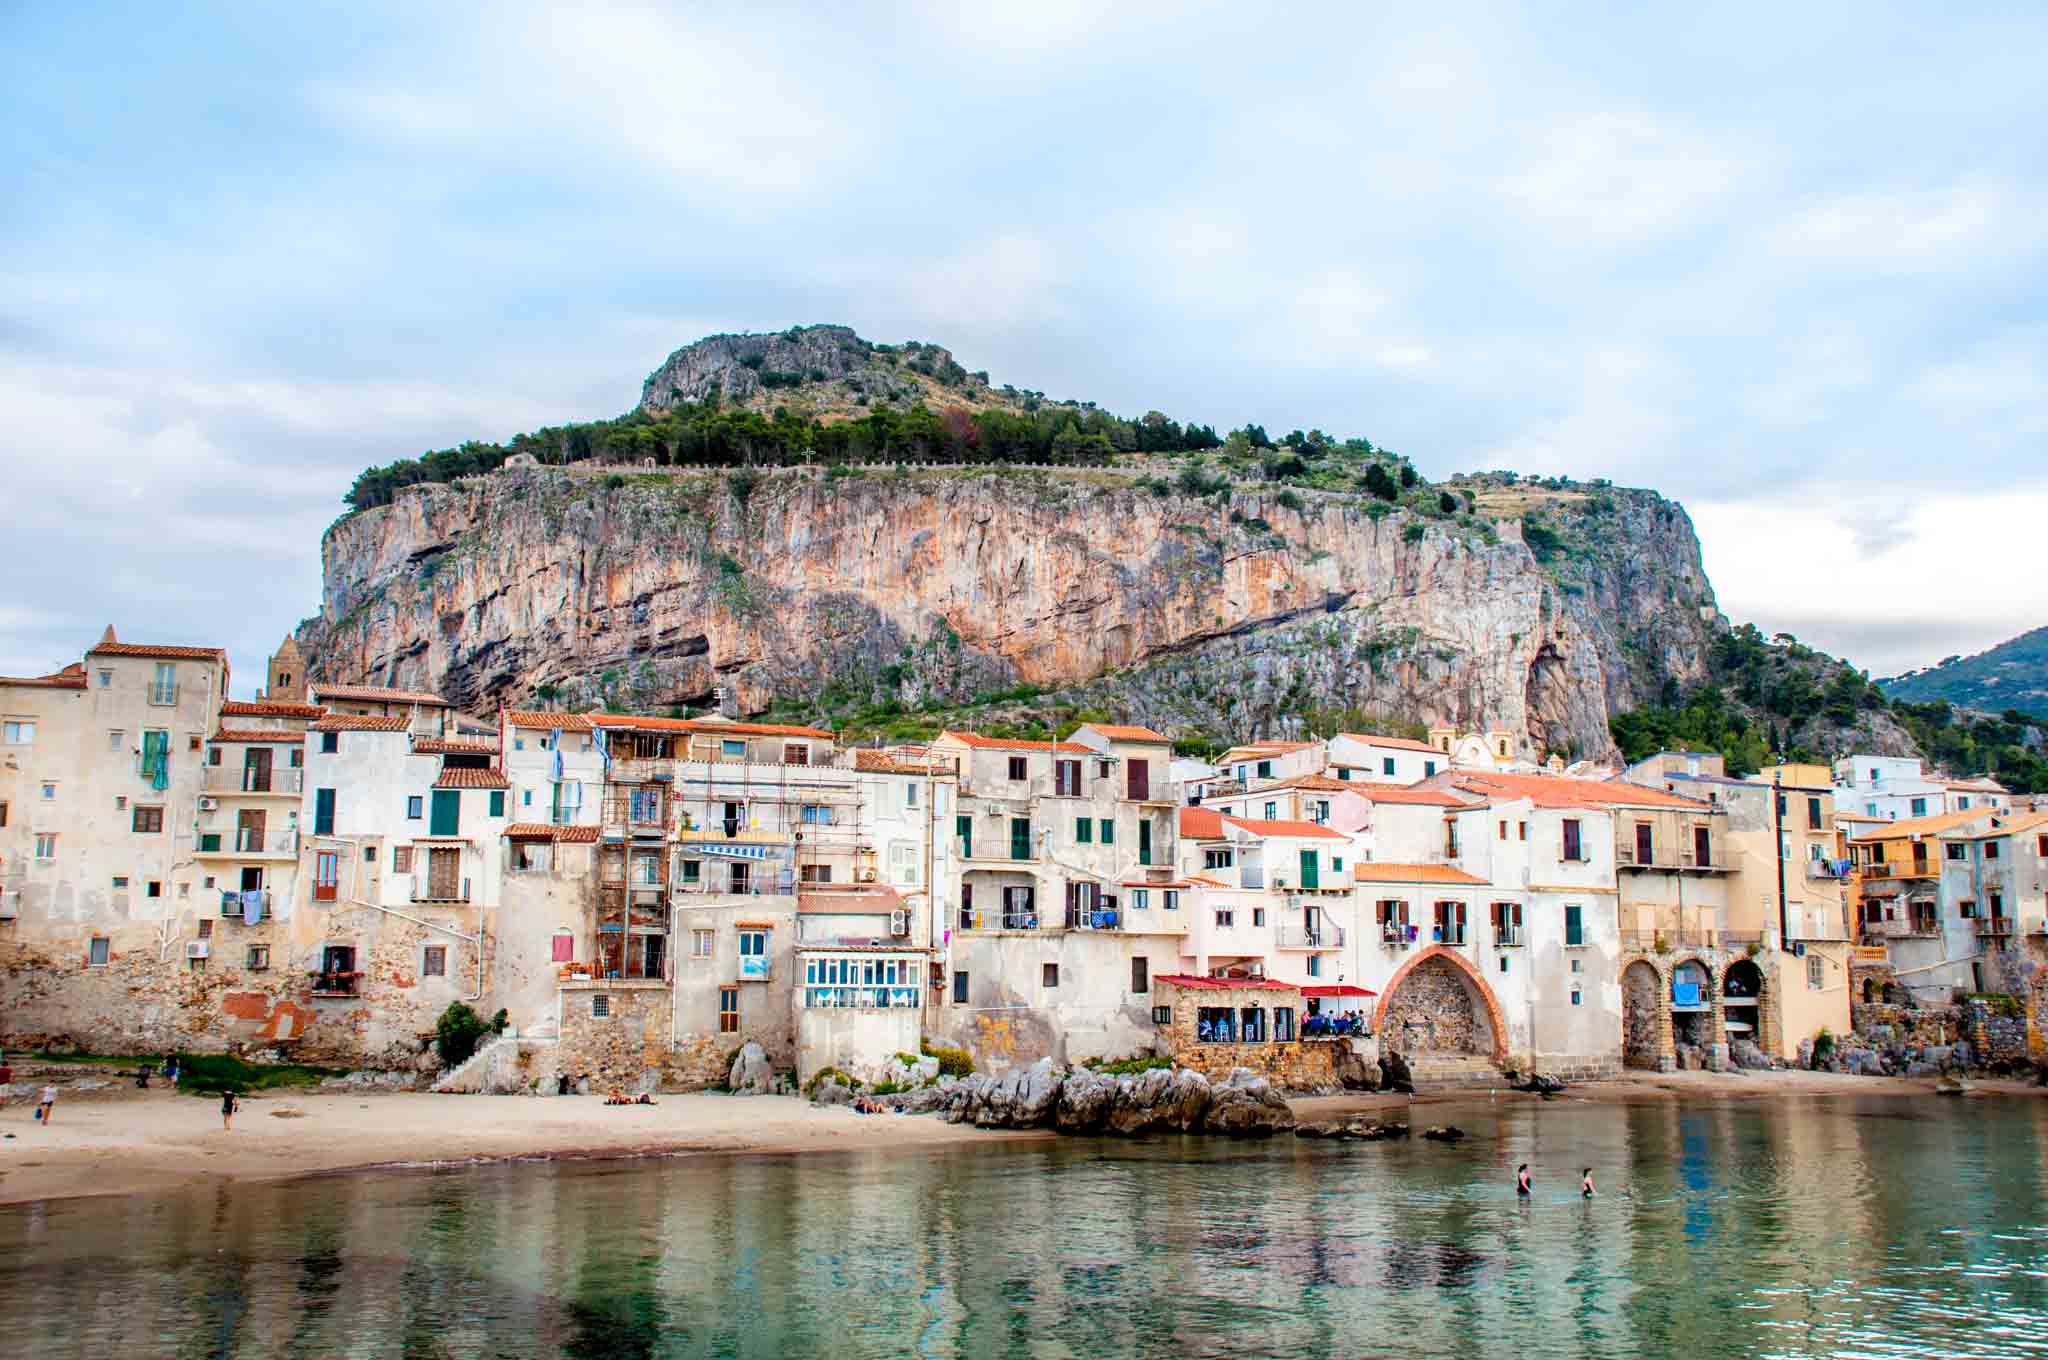 Don't miss Taormina when you visit Sicily. Its stunning location makes it one of the best things to see in Sicily.